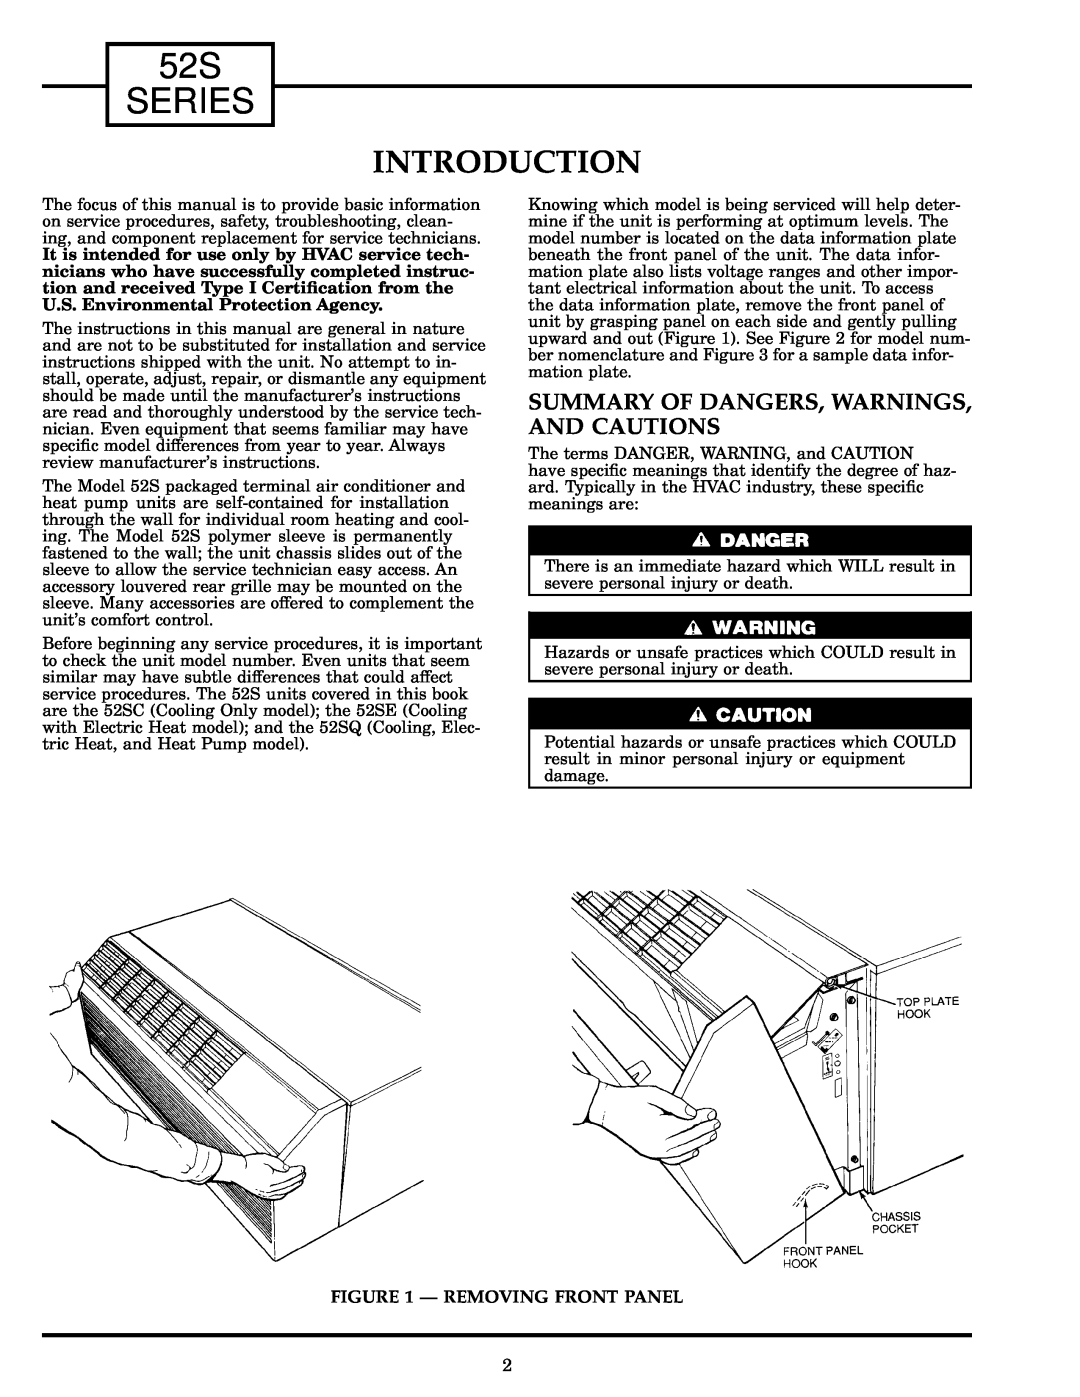 Carrier manual Introduction, Summary Of Dangers, Warnings, And Cautions, Ð Removing Front Panel, 52S SERIES 